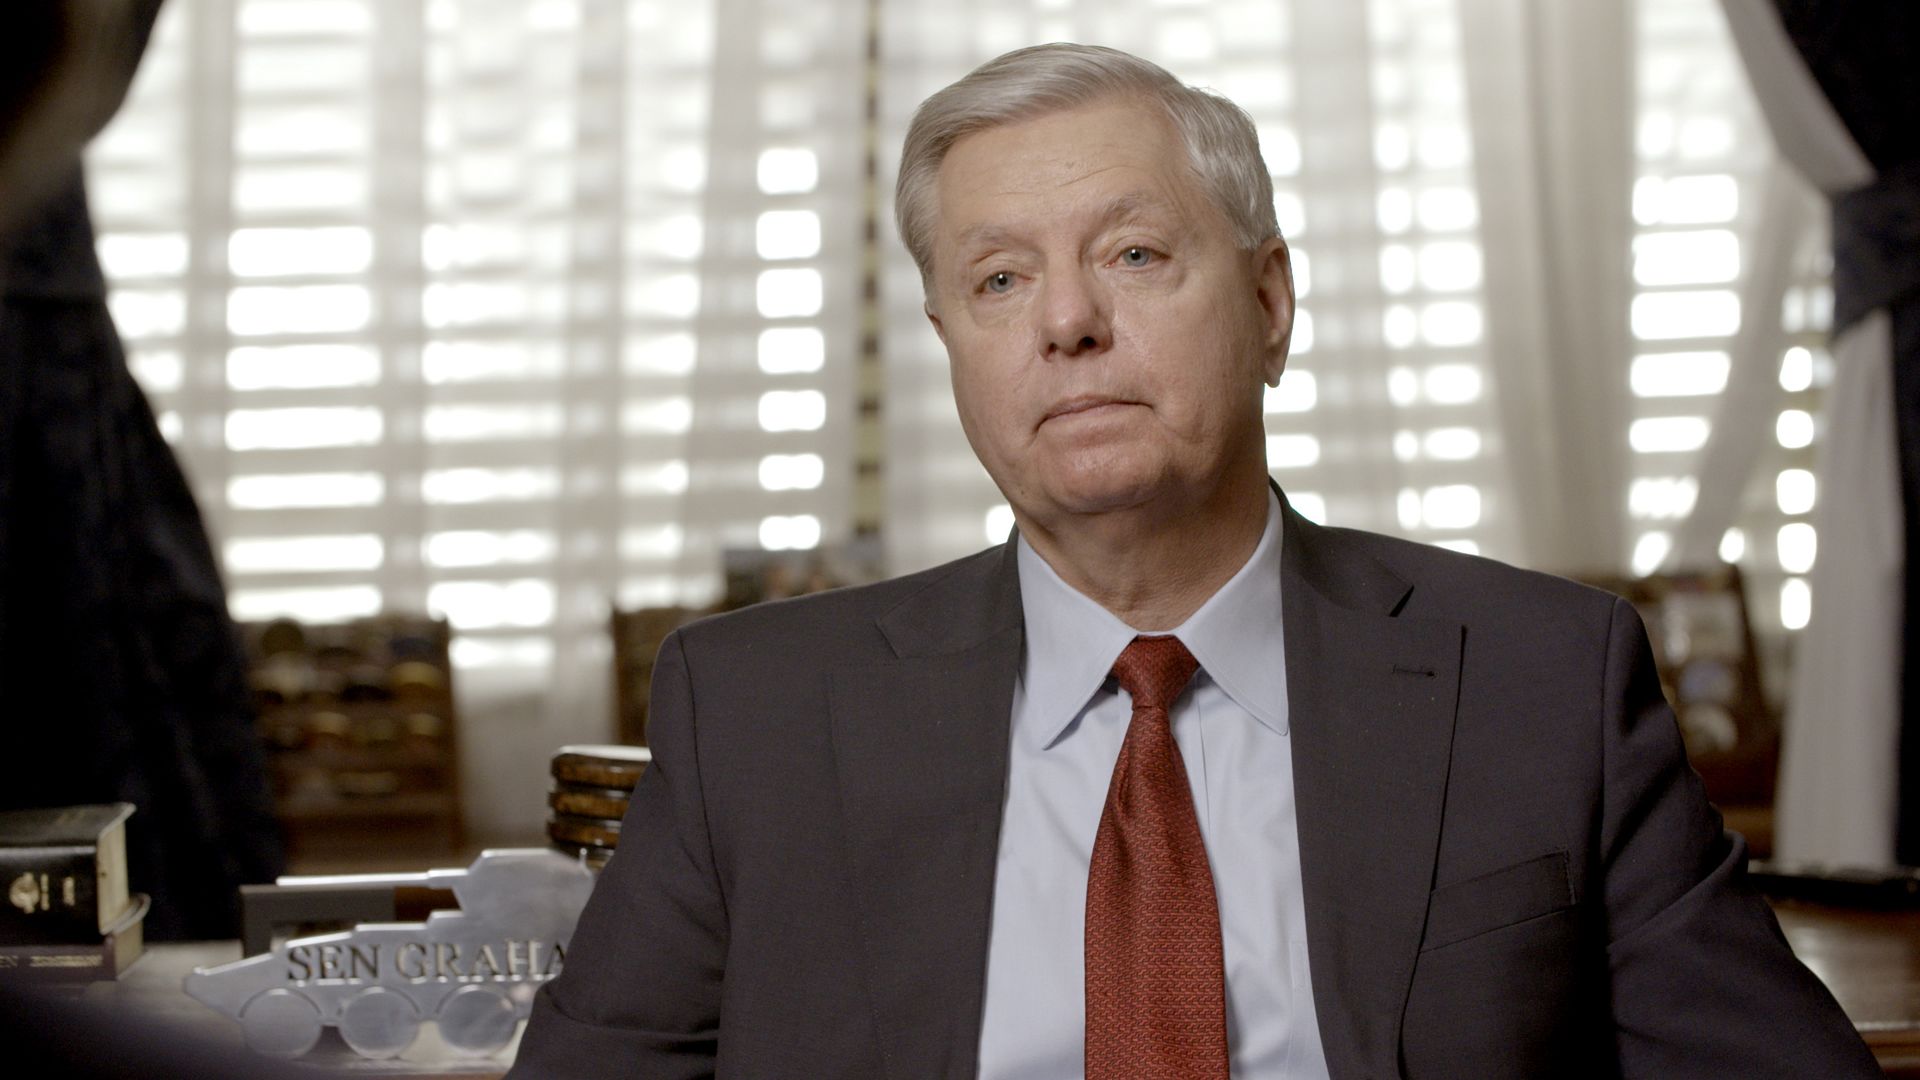 Lindsey Graham speaks in his office during an interview with Axios on HBO